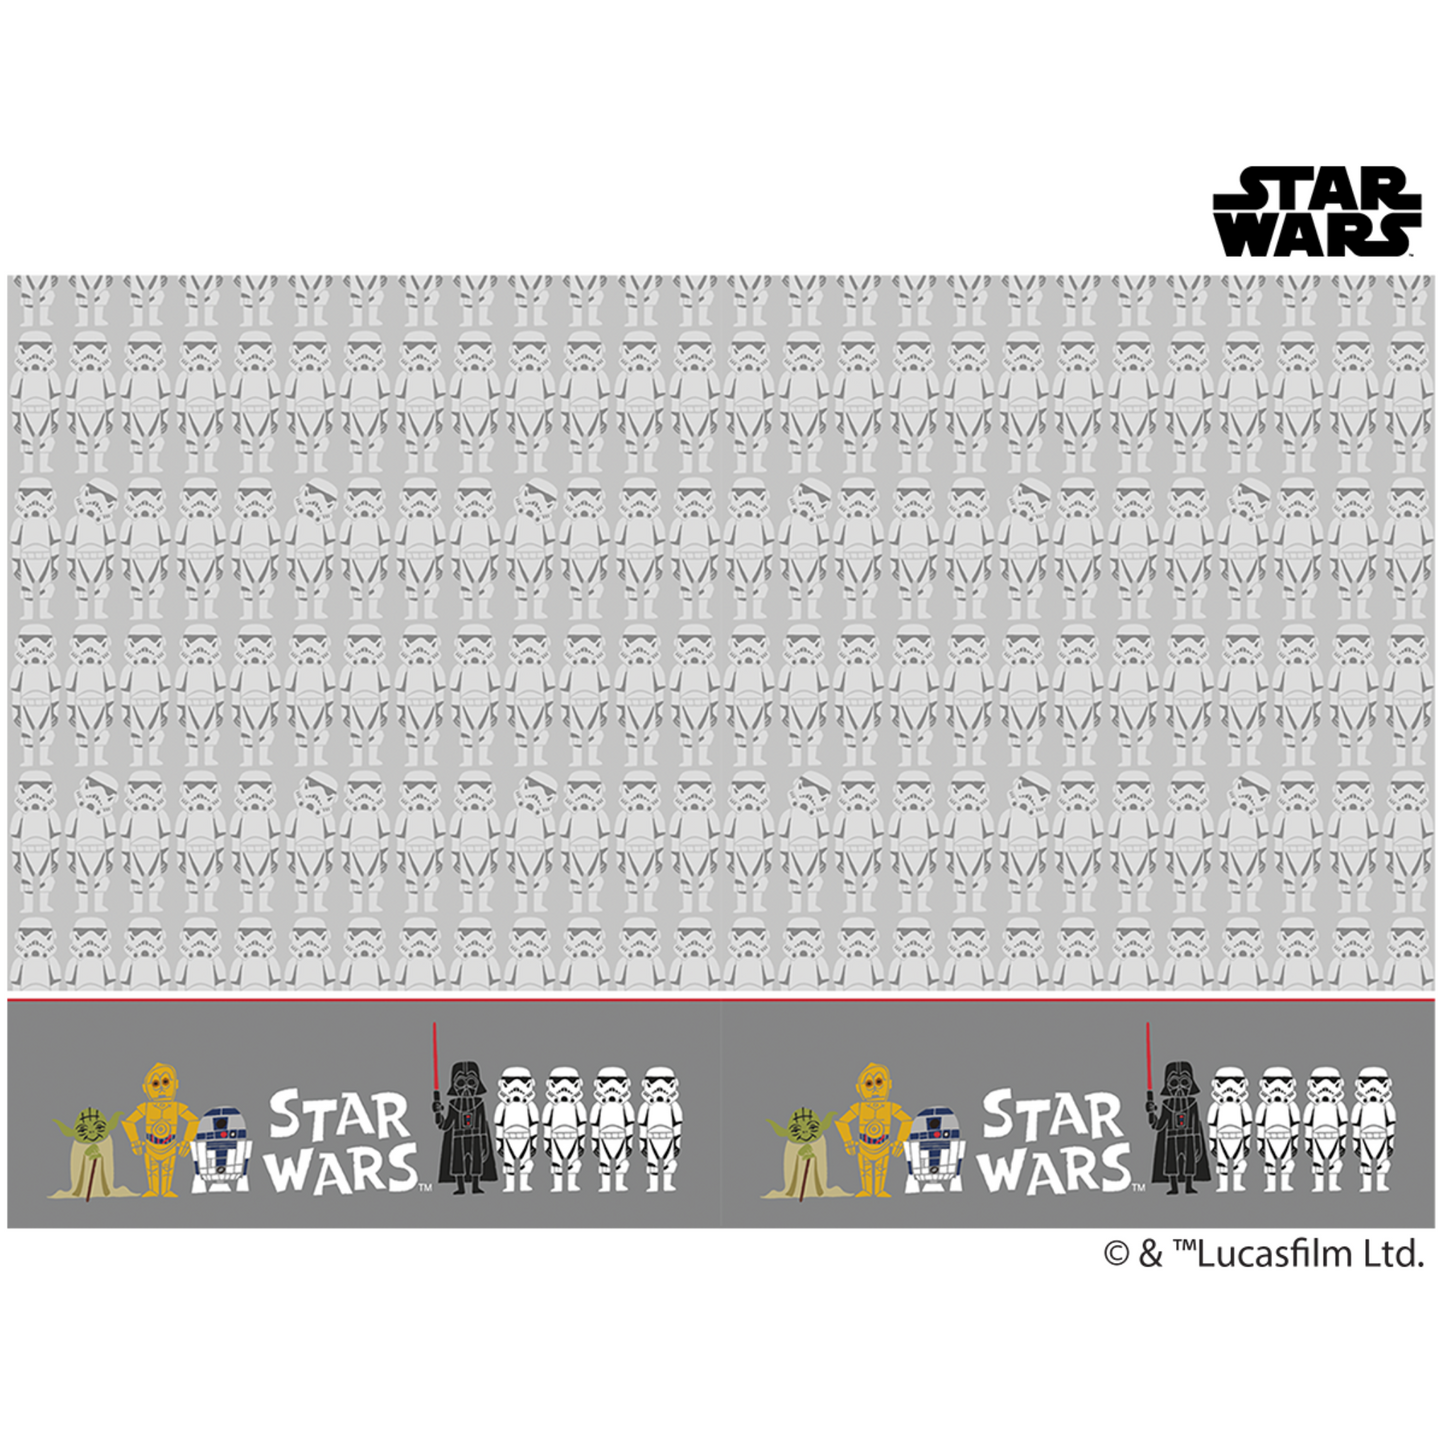 78379 - 1 X PARTY TABLE COVER STAR WARS PAPER CUT